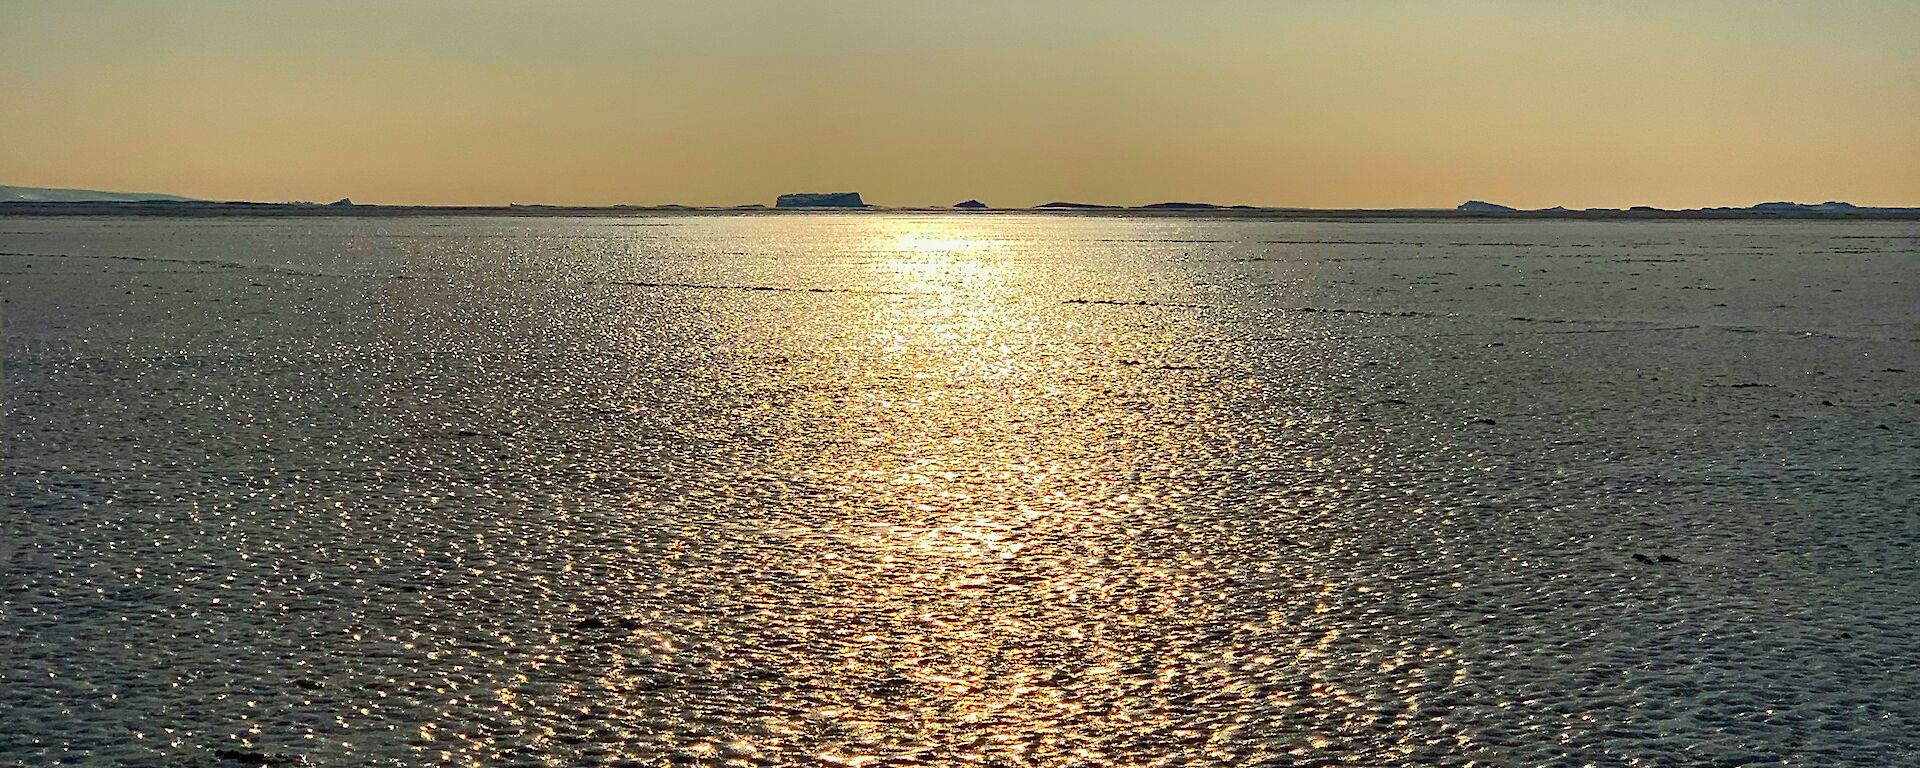 Frozen ice to the horizon, lit by the sun